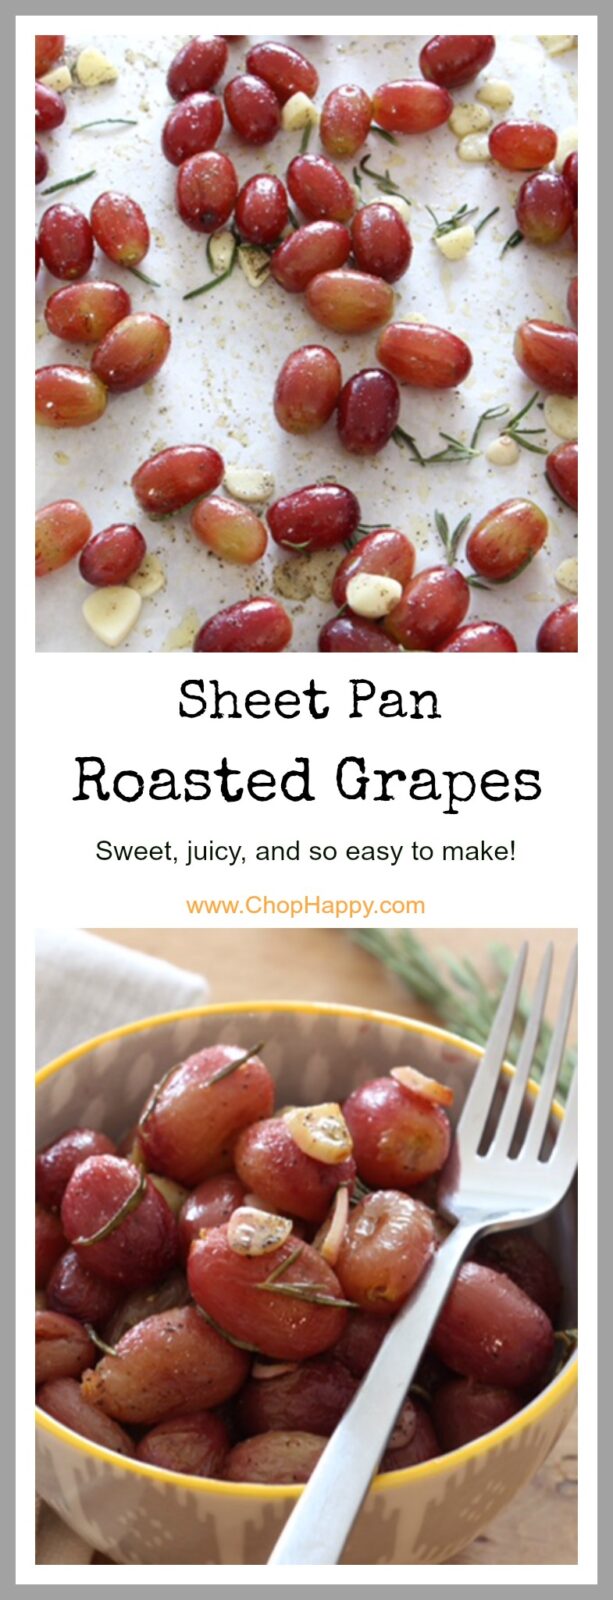 One Sheet Pan Roasted Grapes Recipe- are so easy and turn so juicy and sweet. Your family will be so surprised and feel so special. Perfect side dish. www.ChopHappy.com